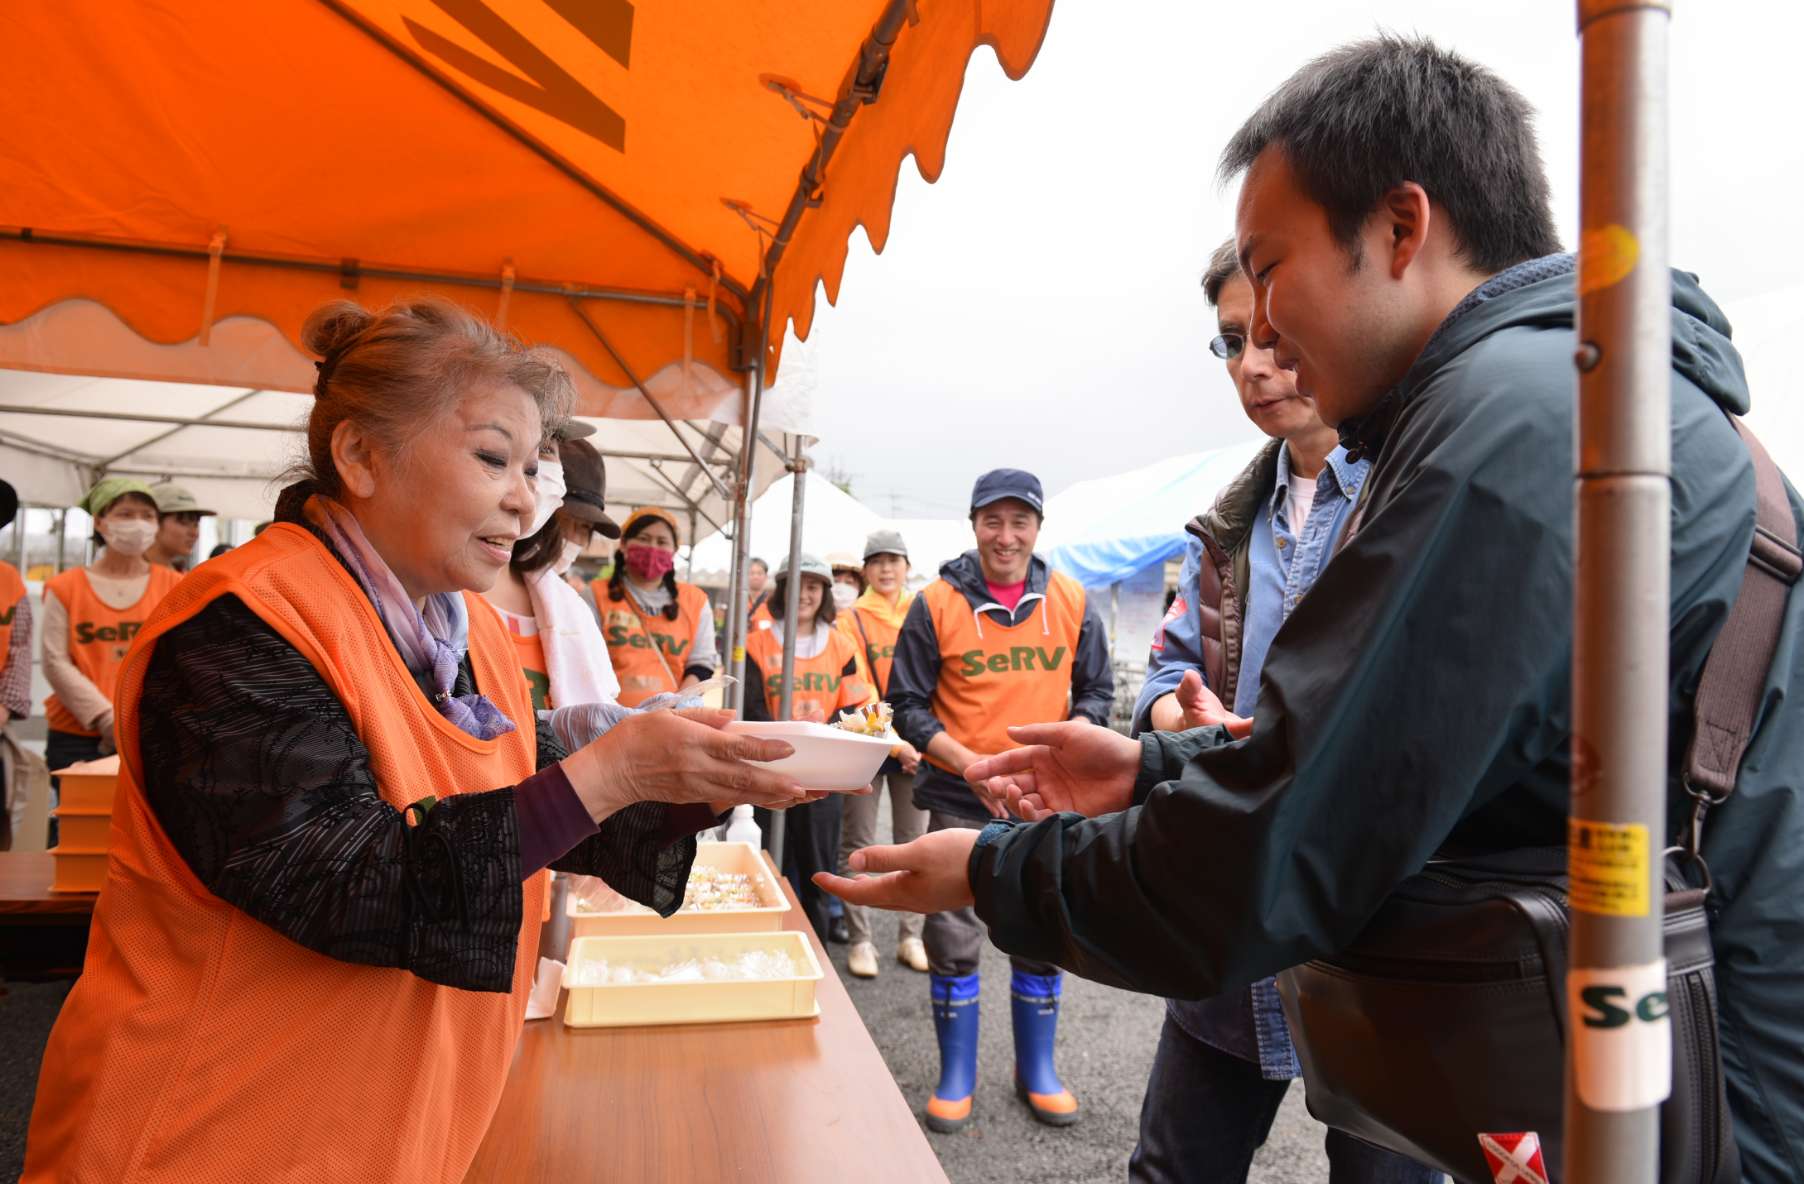 Her Holiness, standing beneath a temporary awning, wearing an orange volunteer vest over her jacket, offers a bowl of soup to a man who reaches out to accept it.